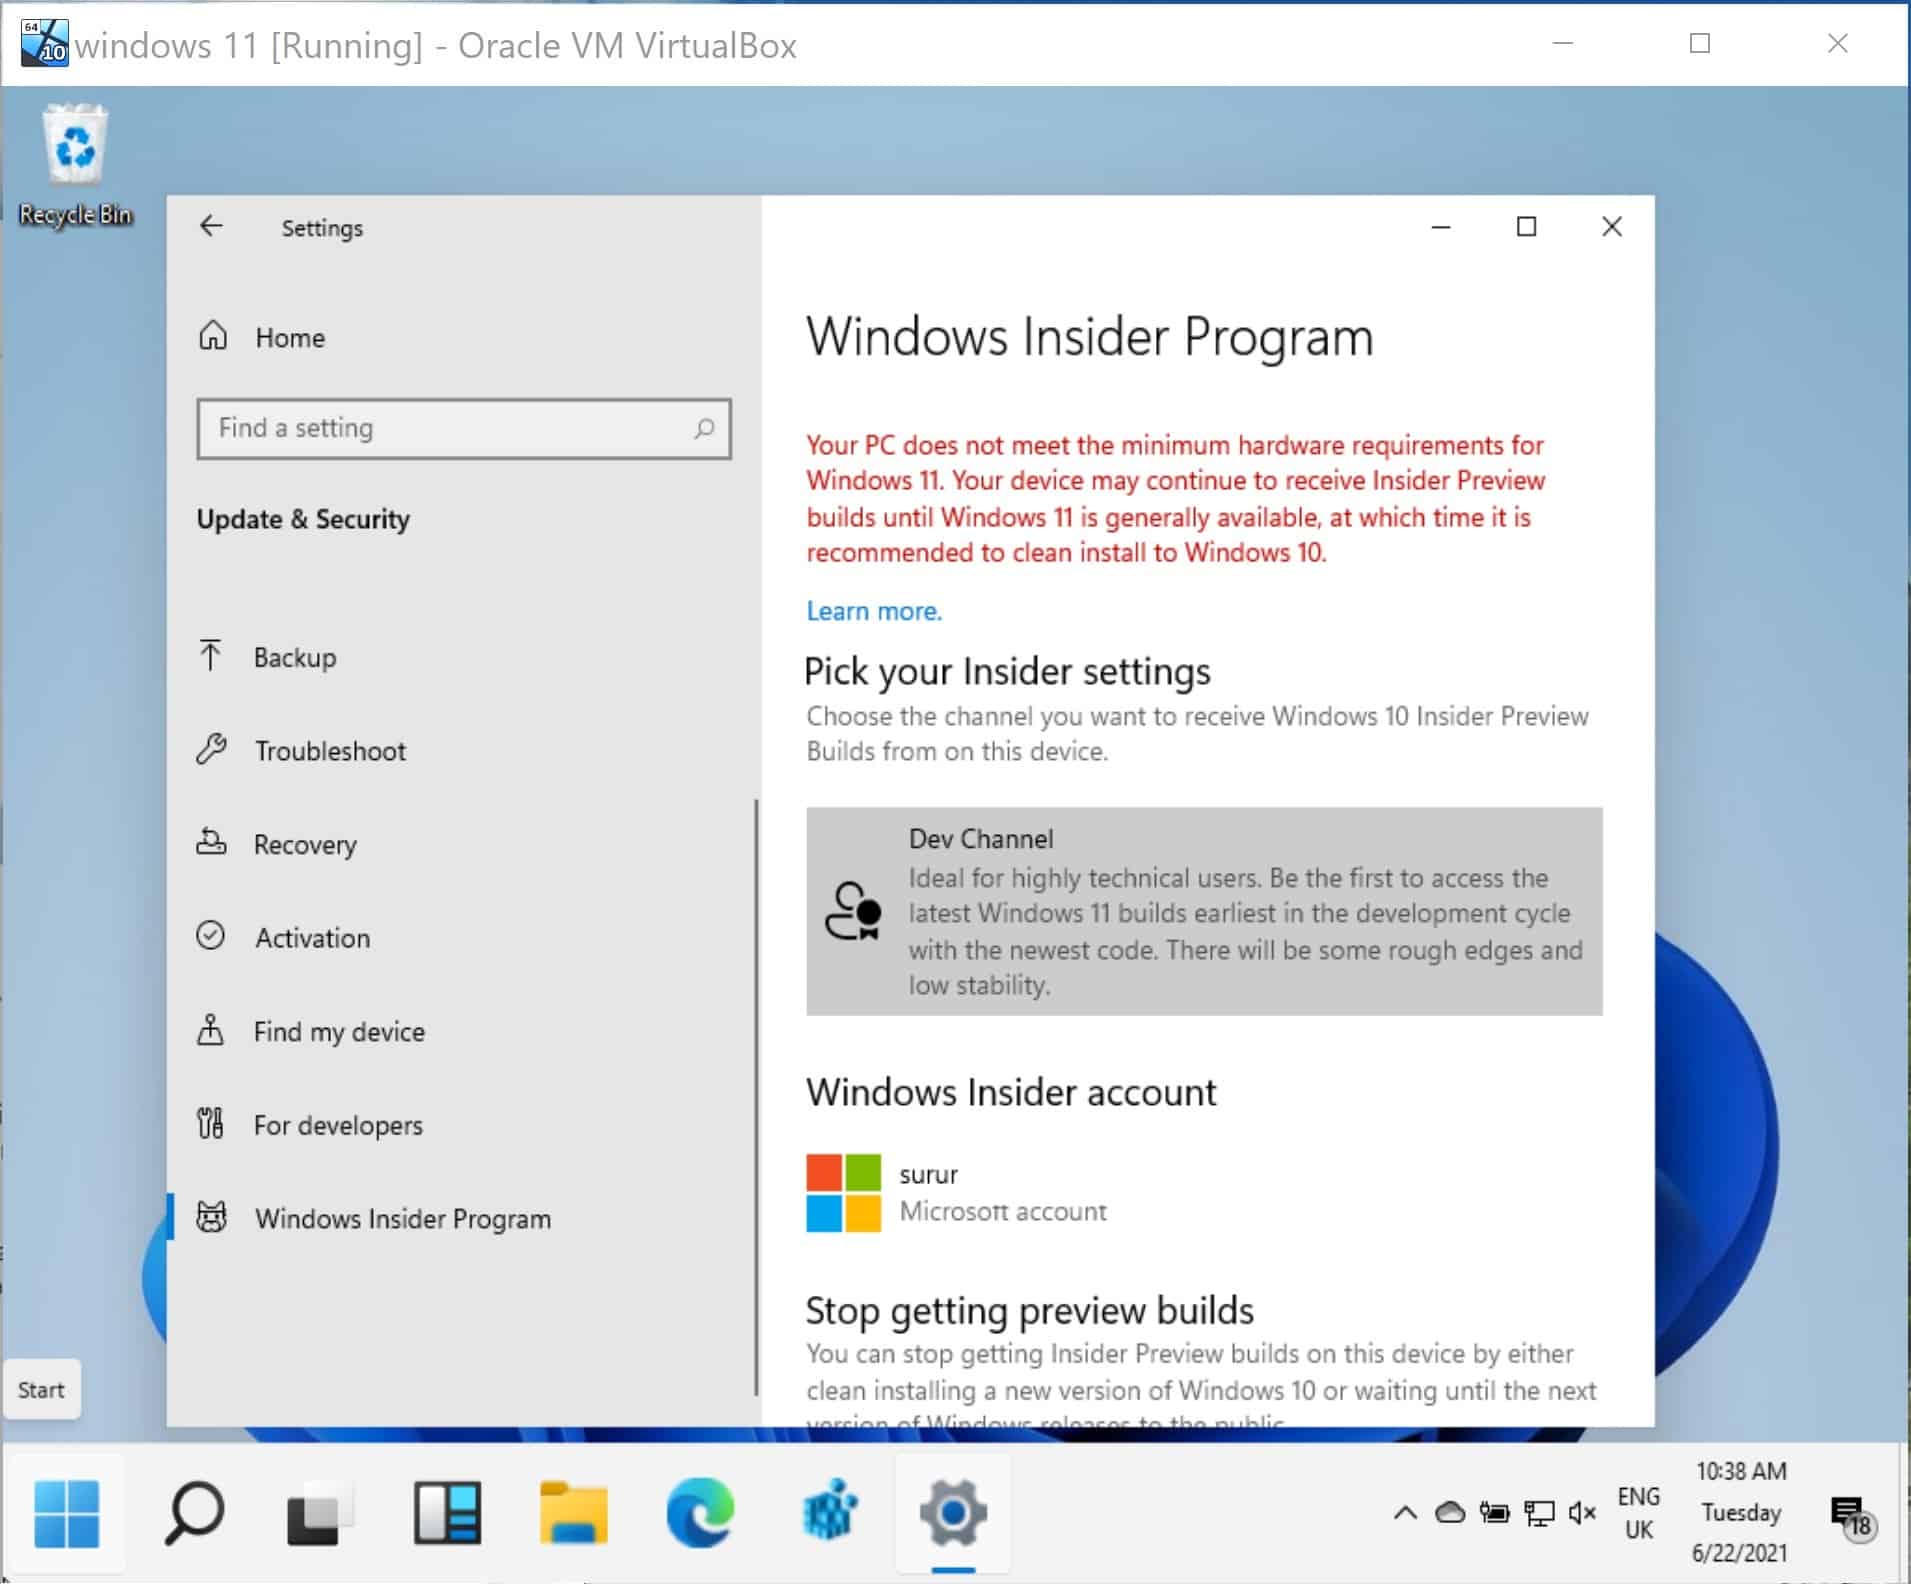 How to get Windows 11 Dev builds if your PC does not meet minimum hardware criteria